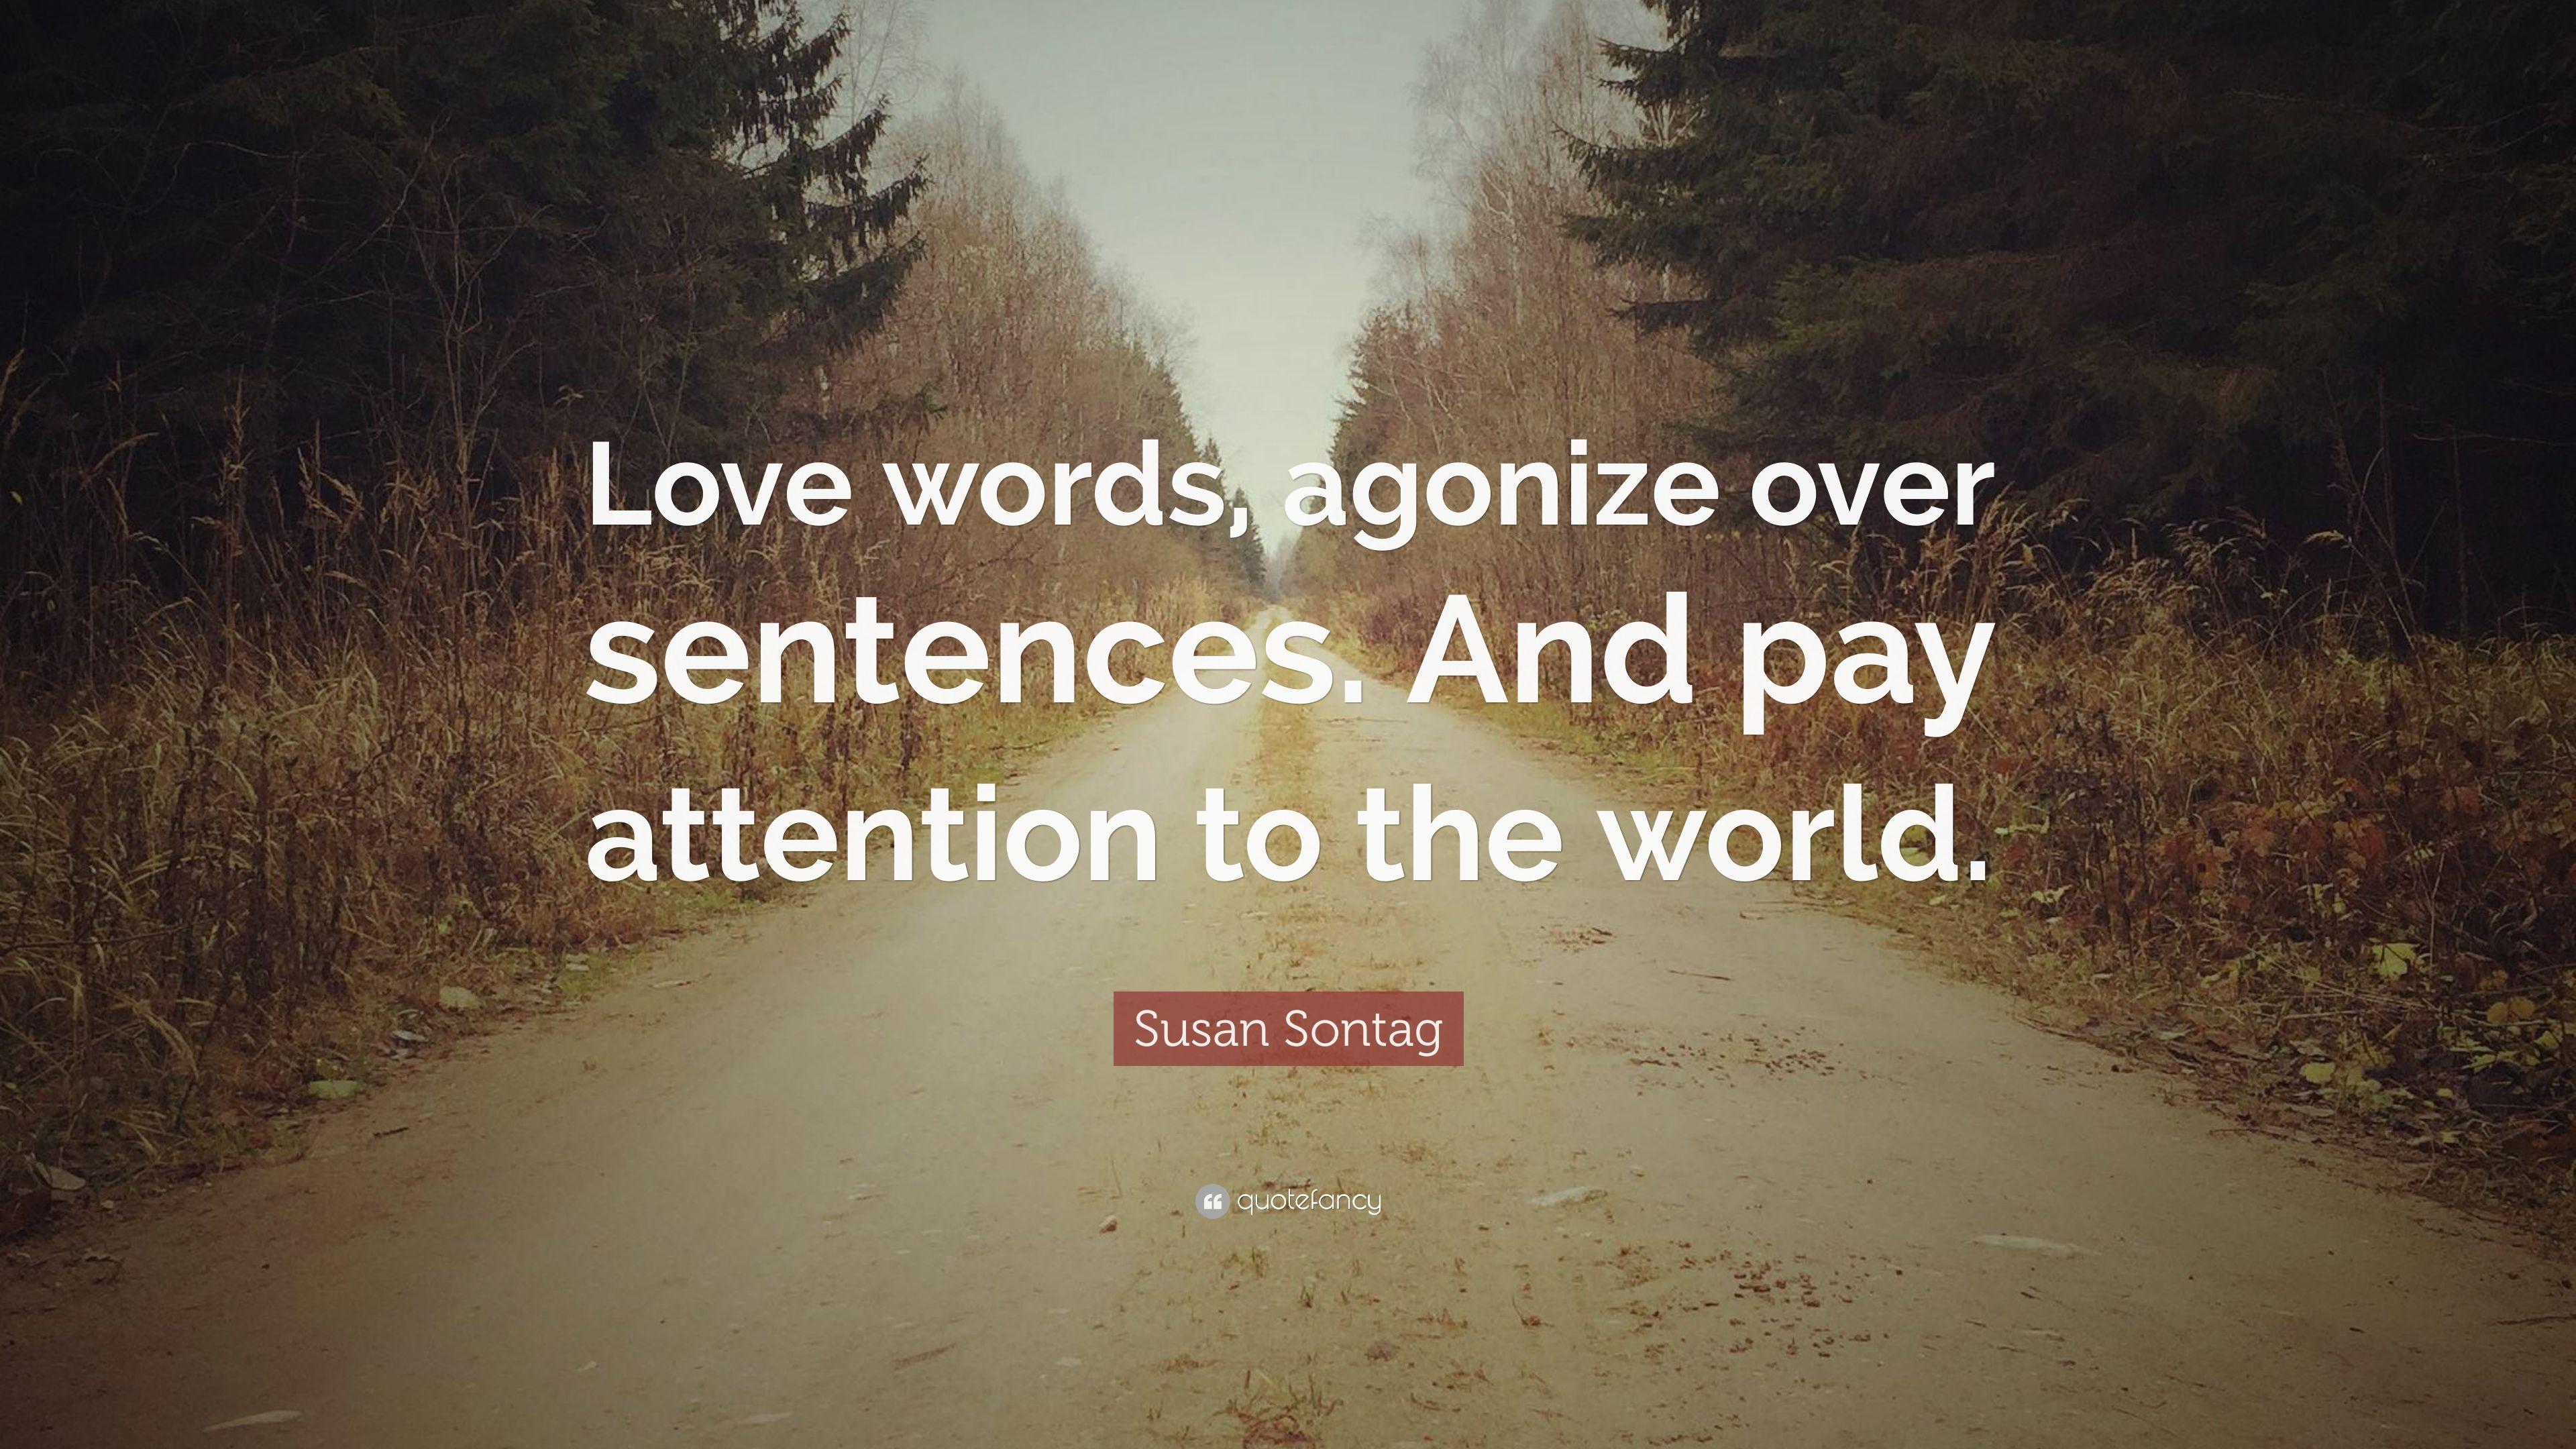 Susan Sontag Quote: “Love words, agonize over sentences. And pay